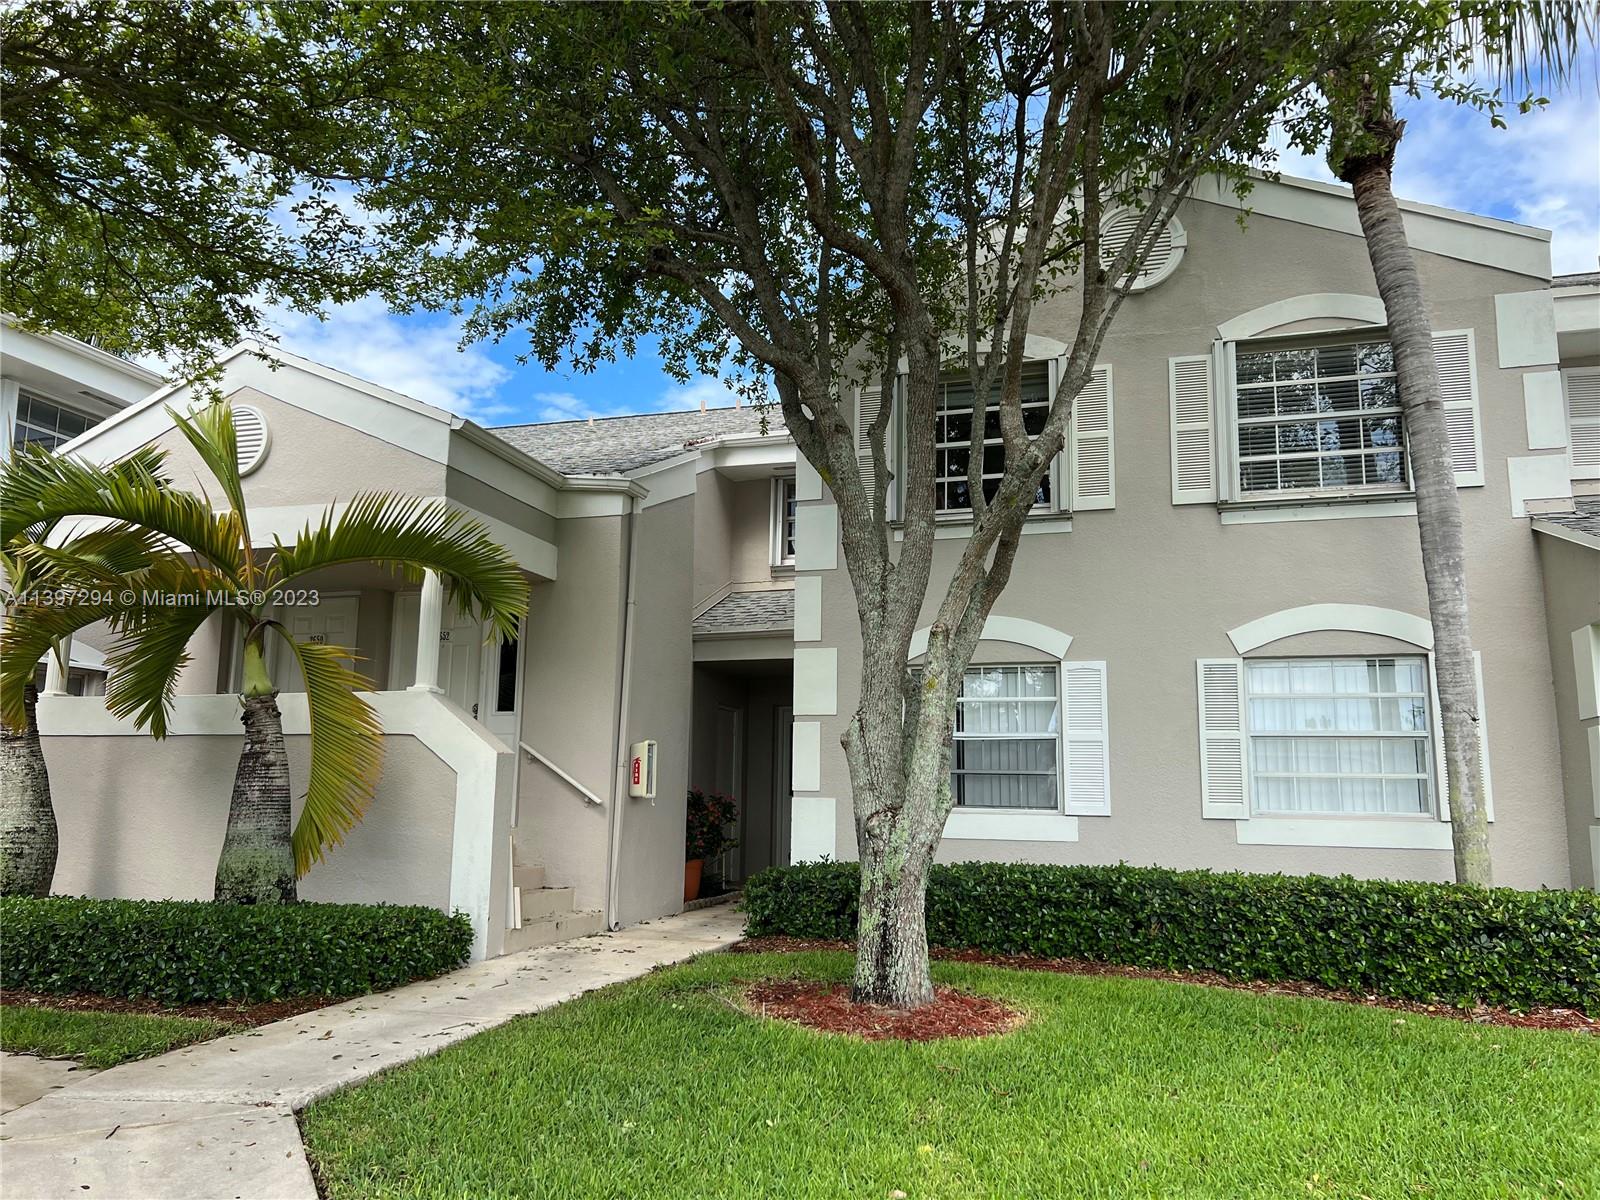 Available on June 17th, 2023. Tenant insurance is required. 1st Month / 2 Security Deposits. Agents please send Background/Criminal check for every person over 18+ (Call LA for details) Proof of funds / Last 2 months of PayStub Credit Score. Beautiful 2/2 condo in gated community of Center Gate te at Keys Gate. Interior Laundry, Storage room, assigned parking, guest parking and screened / covered patio. Accordion Shutters. UVERSE 200 (CABLE AND INTERNET) and water included. You wont believe the amenities & activities Keys Gate lifestyle offers. Clubhouse with olympic size pool, Sauna, Exercise Room. There is a billiards room with multiple tables library card room & more. Community has 24 hour roving security. Close to Turnpike.